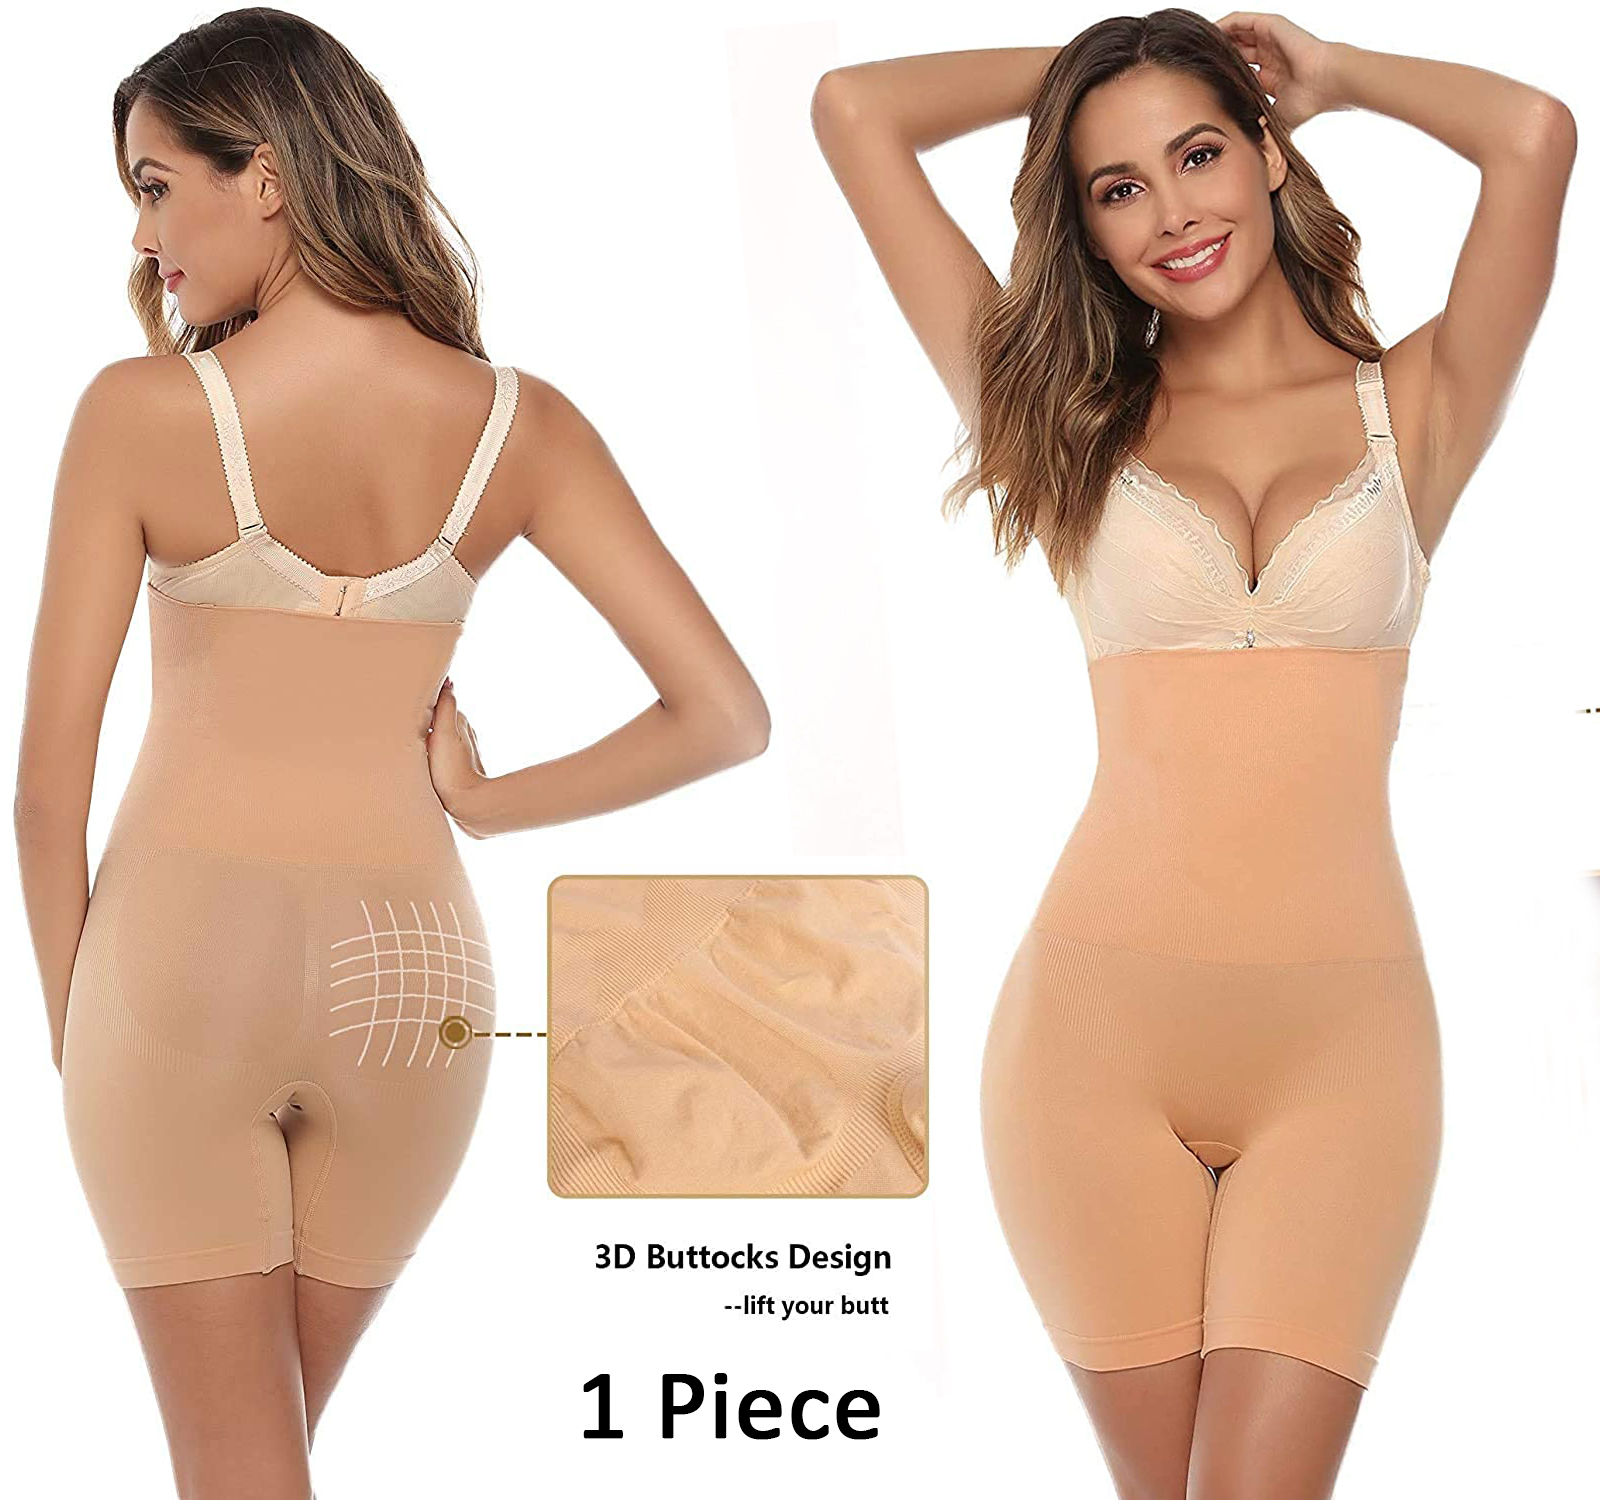 Seamless High Waist Slimming Lower Body Shaper - Free Size for 32